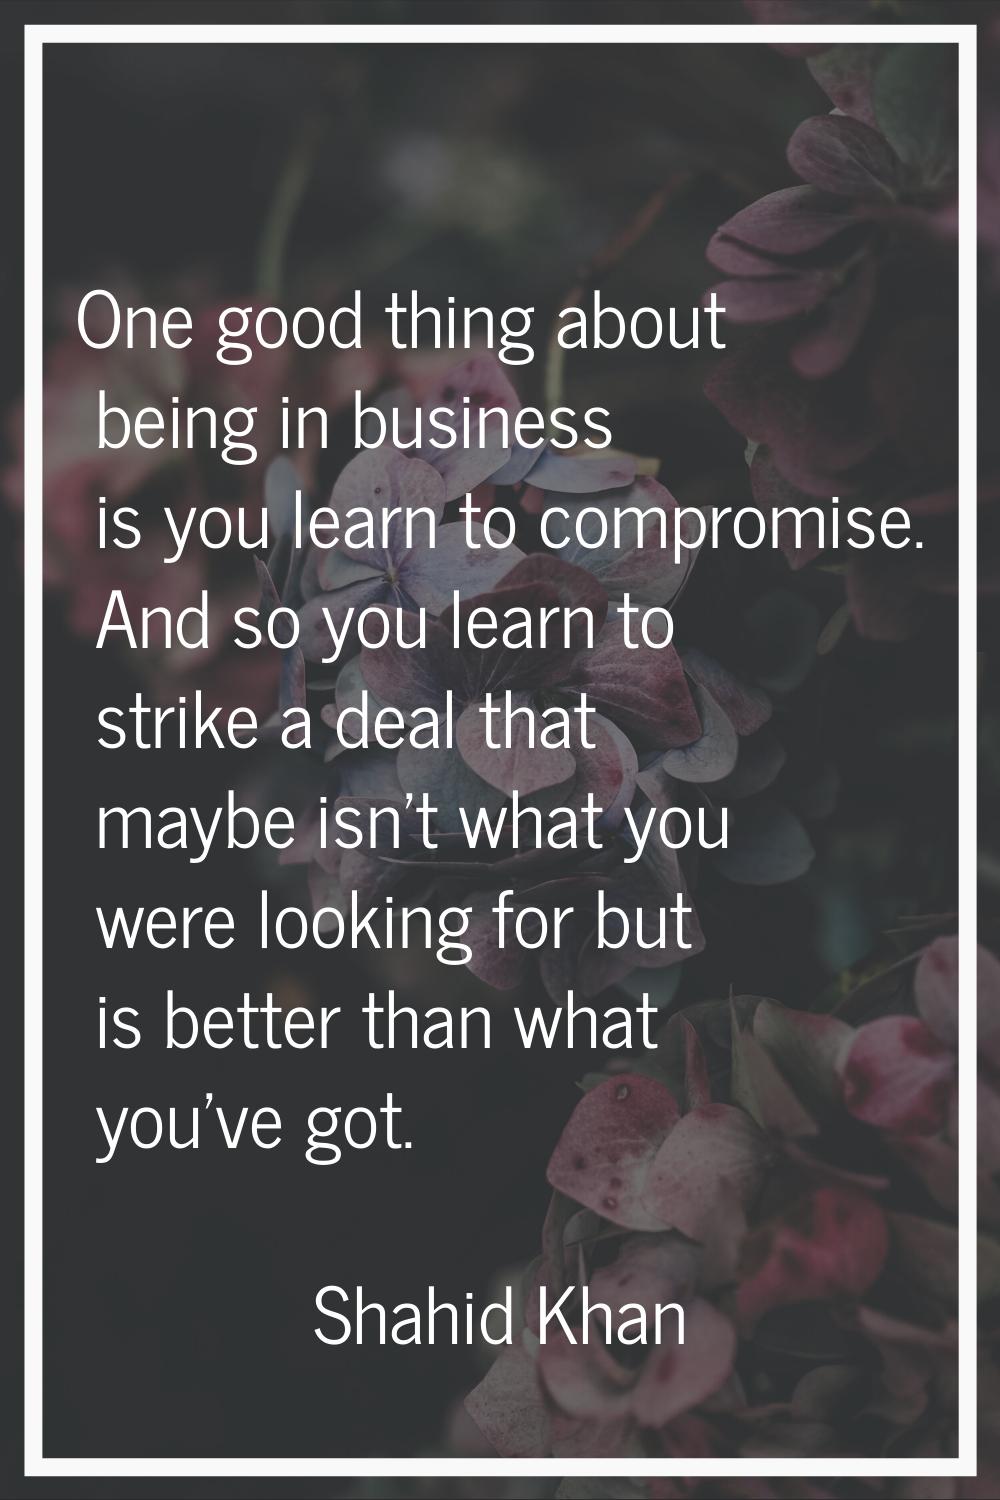 One good thing about being in business is you learn to compromise. And so you learn to strike a dea